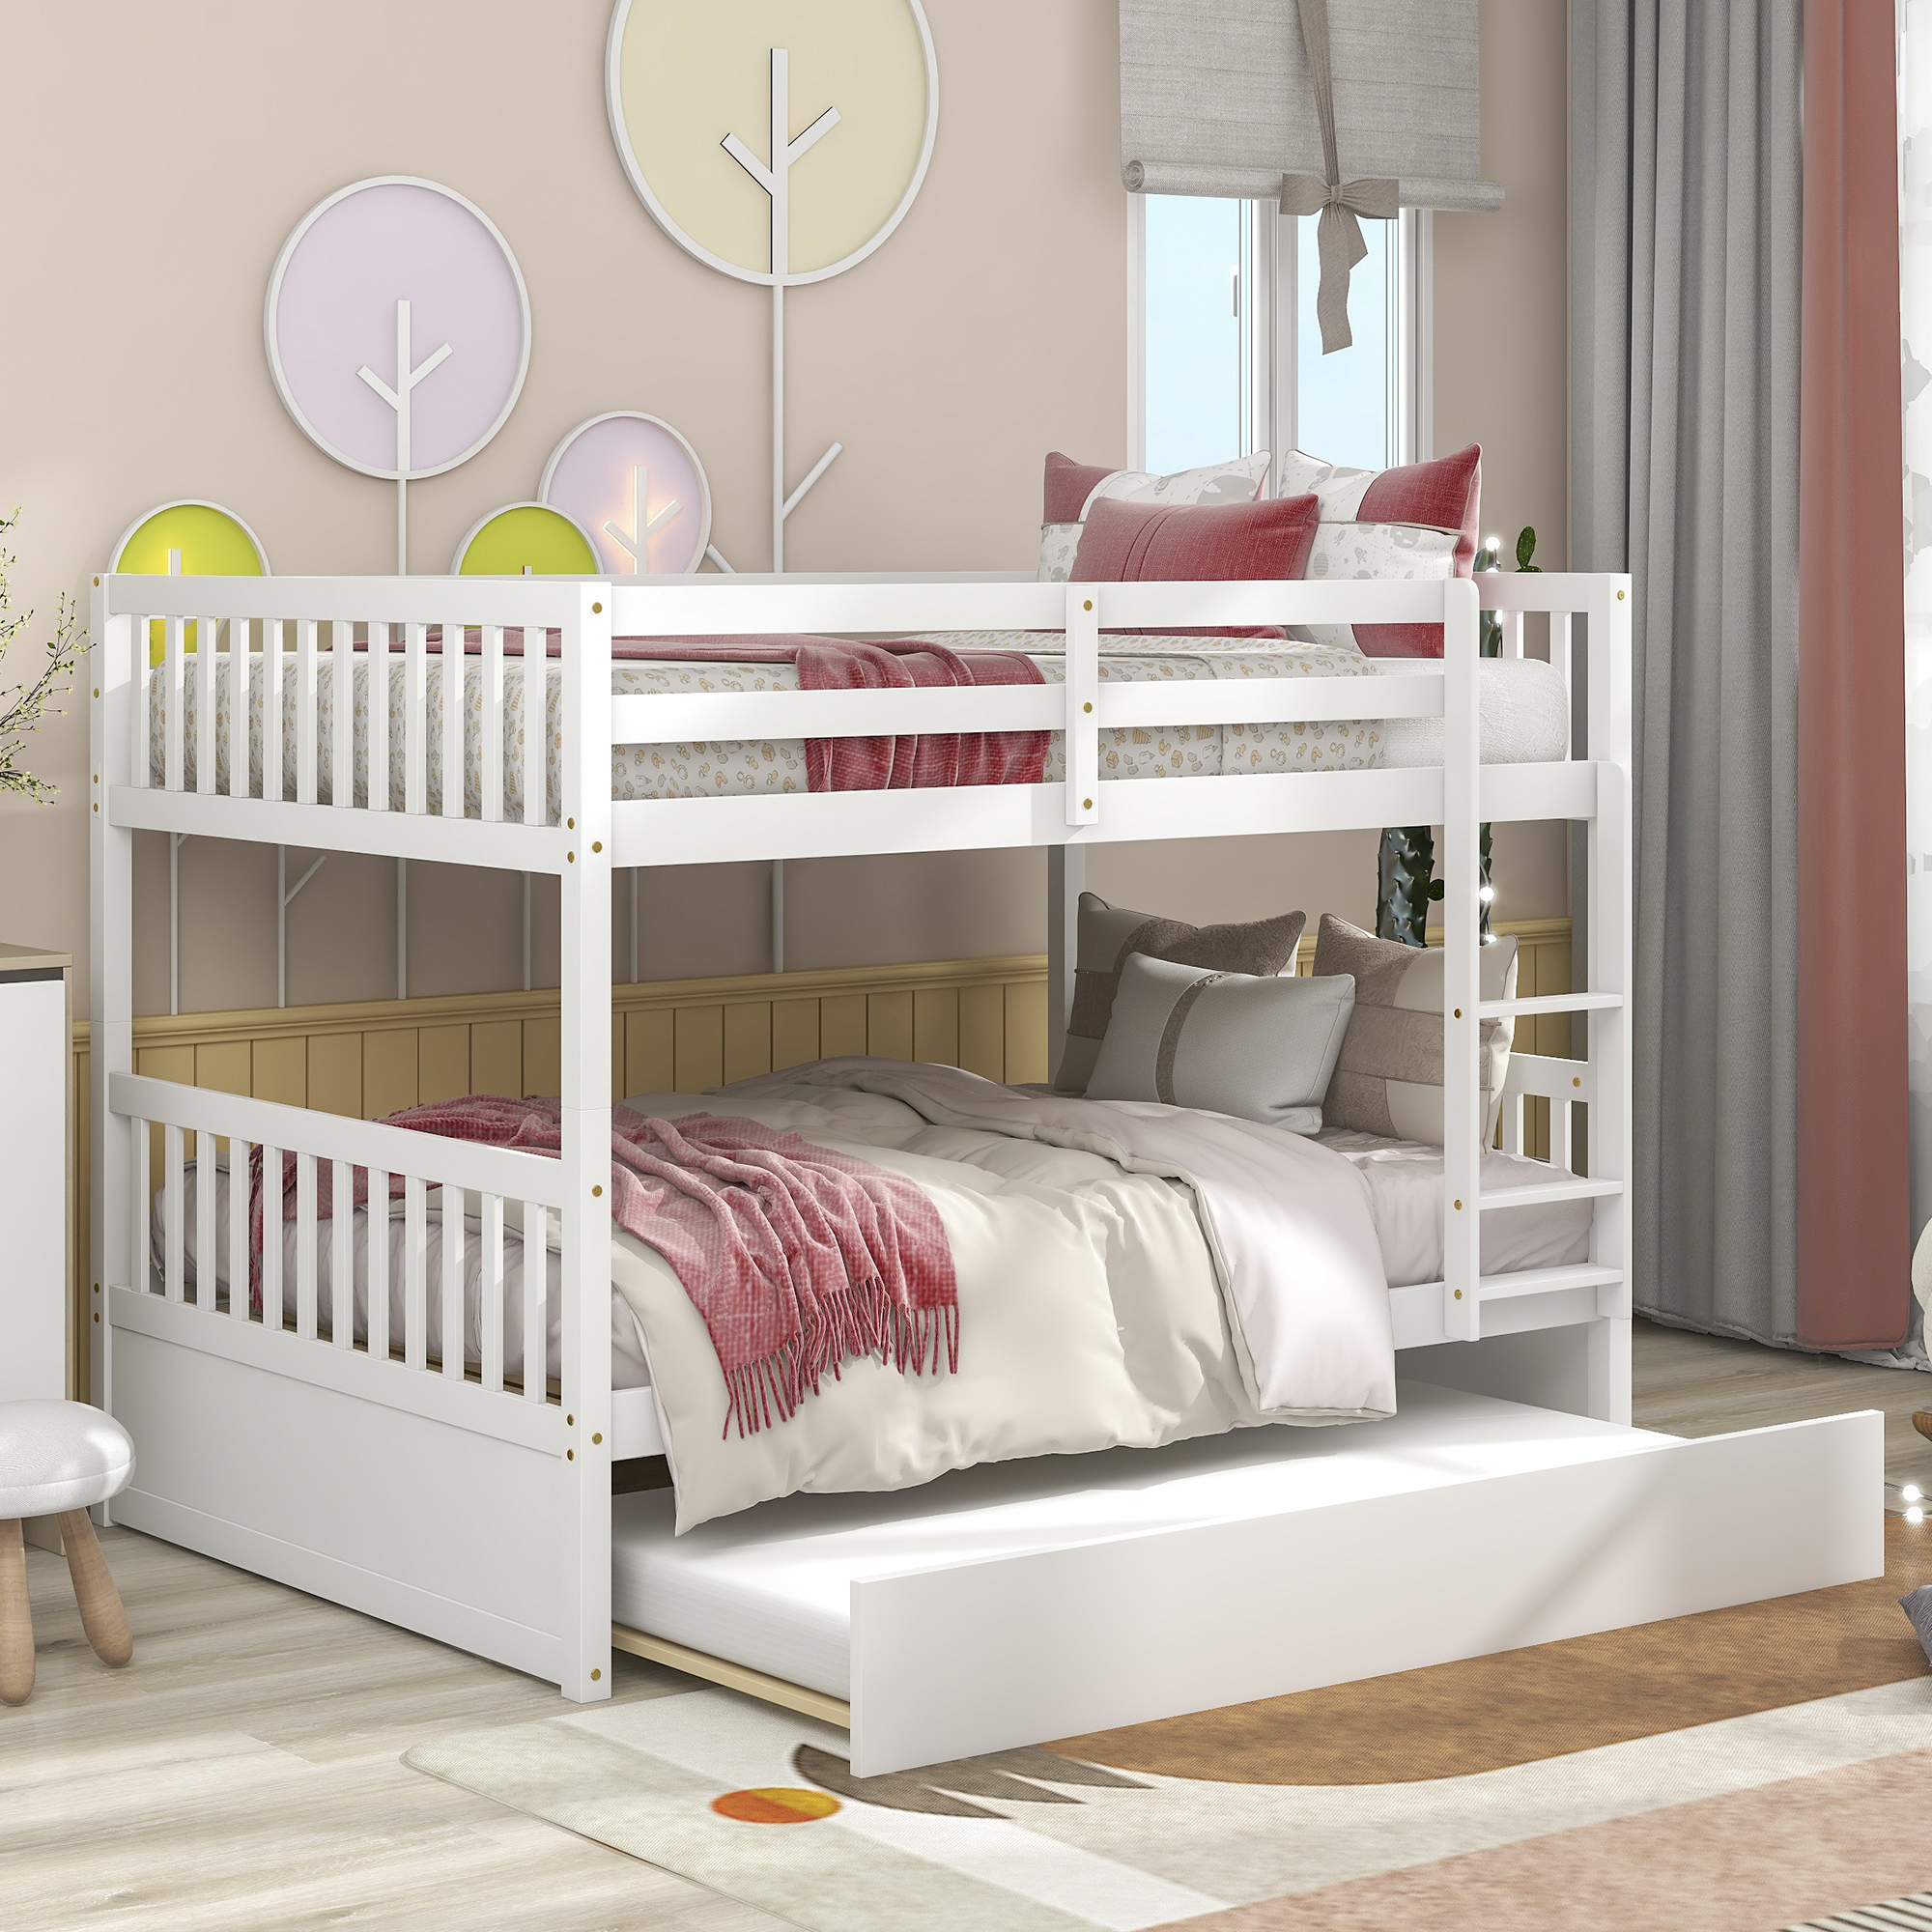 Full Over Full Bunk Bed with Trundle, Convertible to 2 Full Size Platform Bed, Full Size Bunk Bed with Ladder and Safety Rails for Kids, Teens, Adults,White-Boyel Living